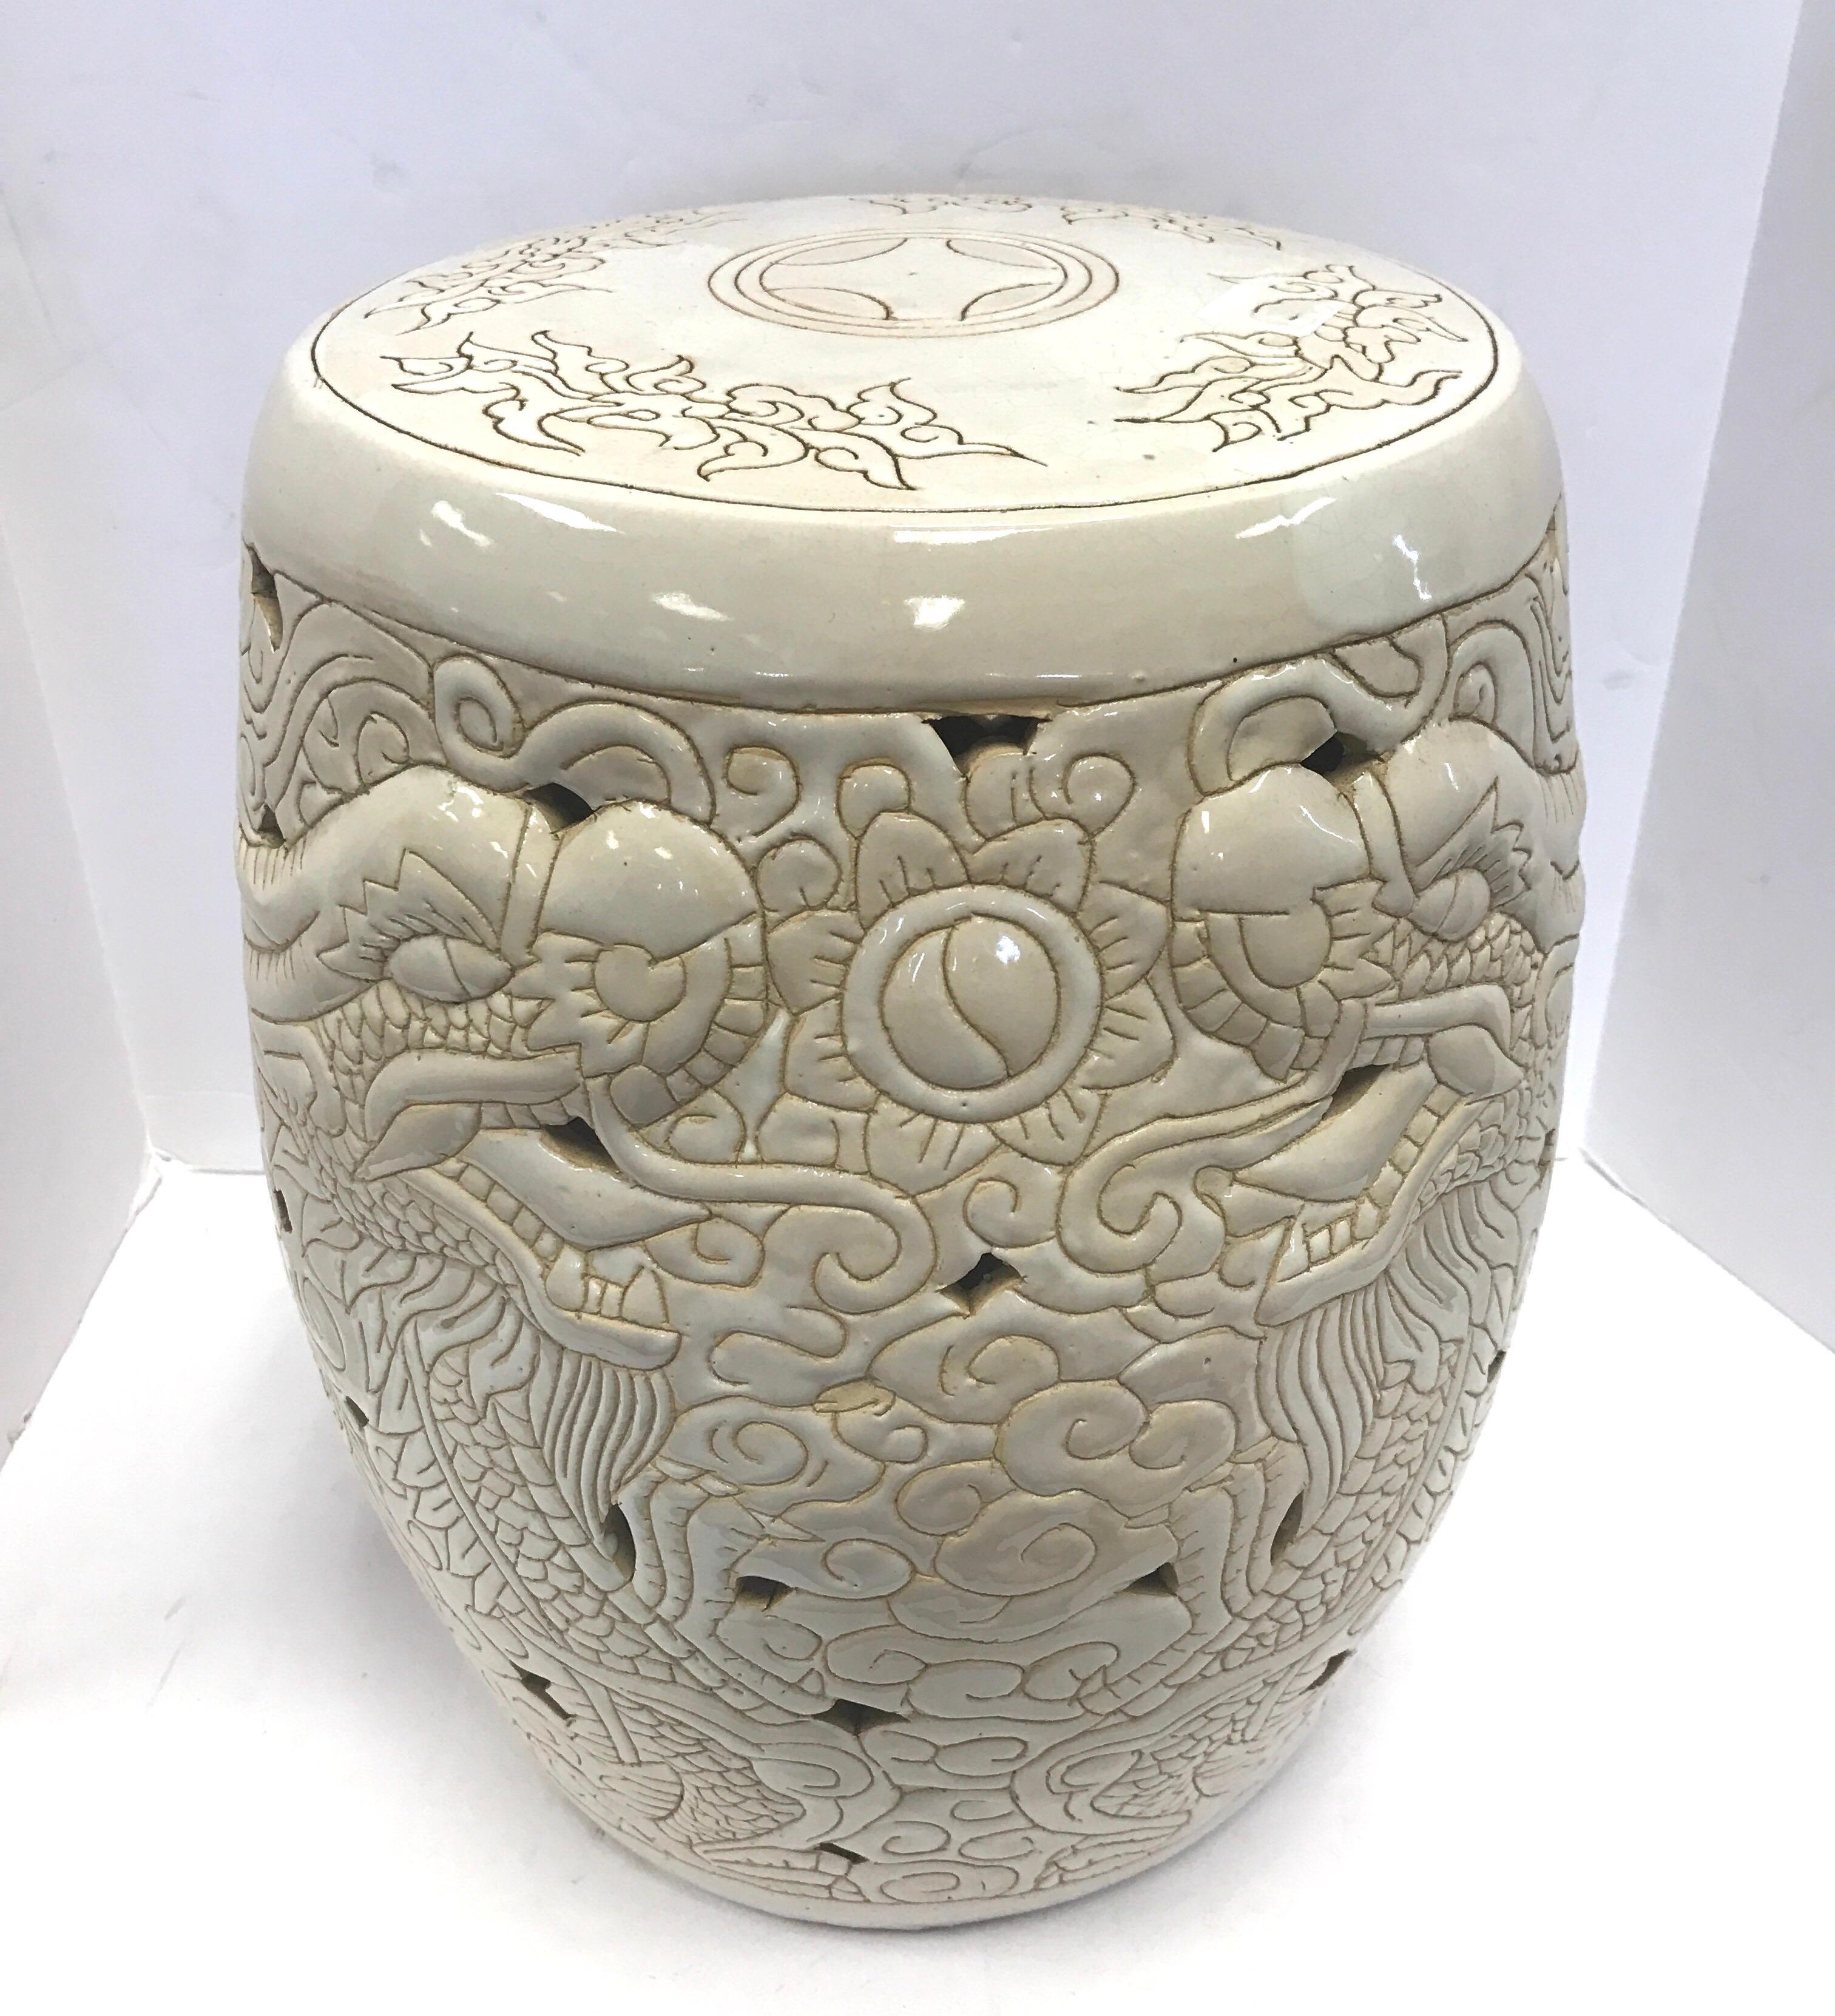 Porcelain drum form finished in warm white glaze with hand-incised tan line work artfully depicting fierce dragons, swirling smoke, flowers and foliage. Design is pierced throughout.